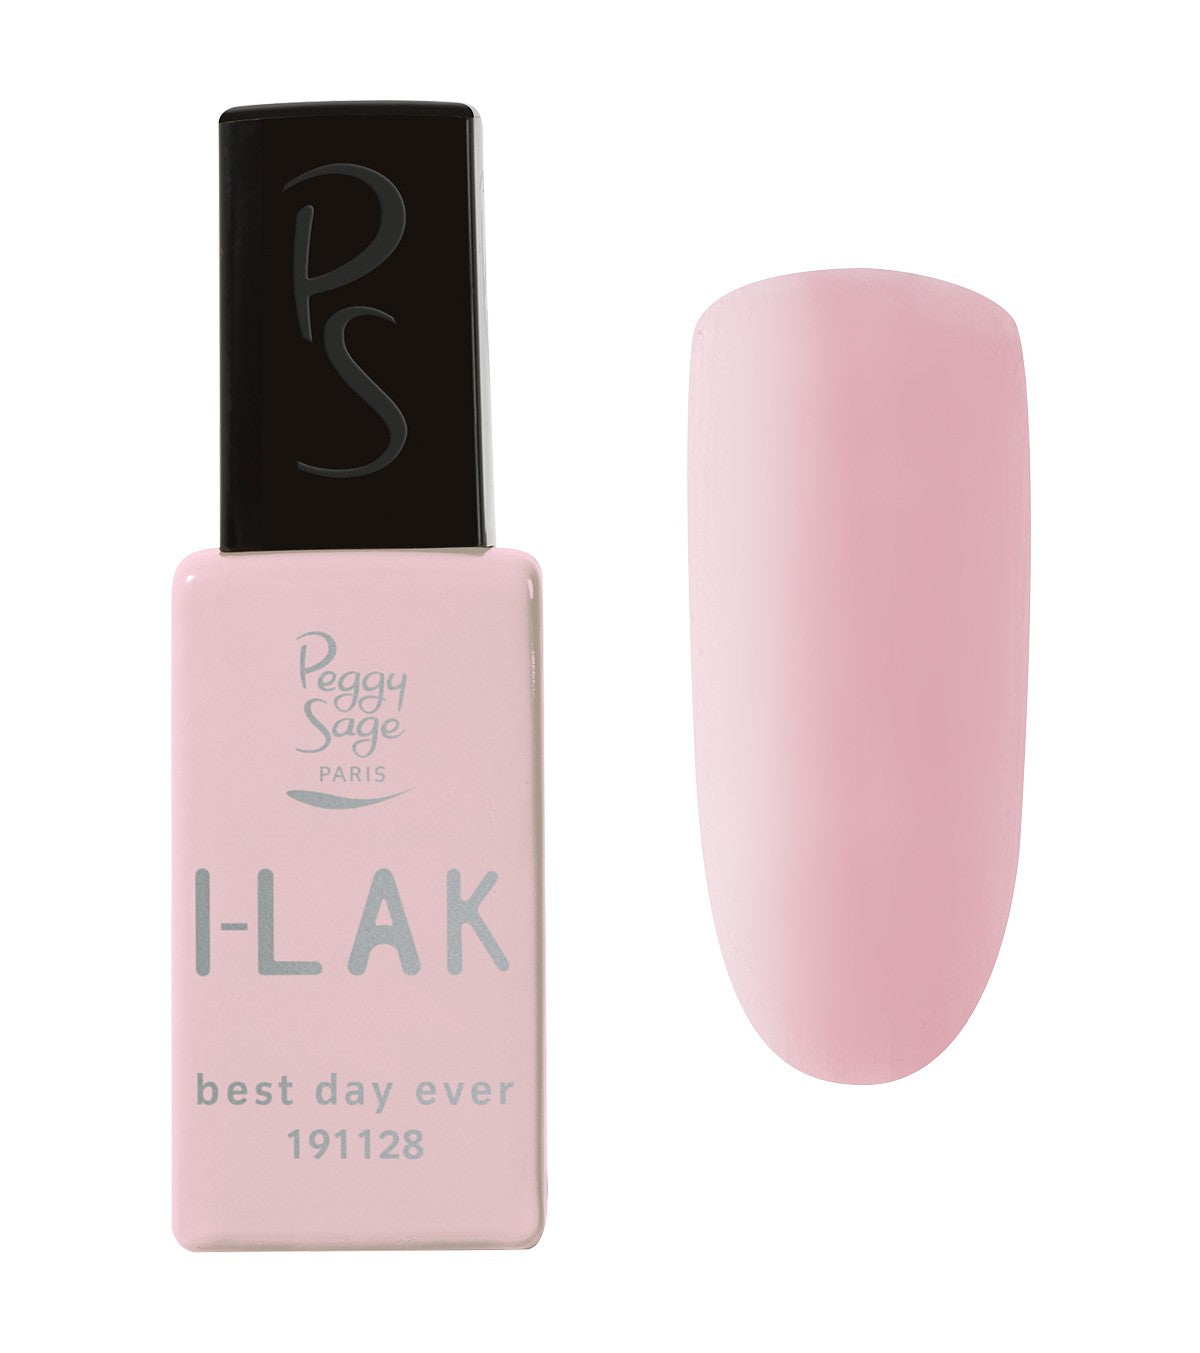 I-LAK Best Day Ever Ref 191128